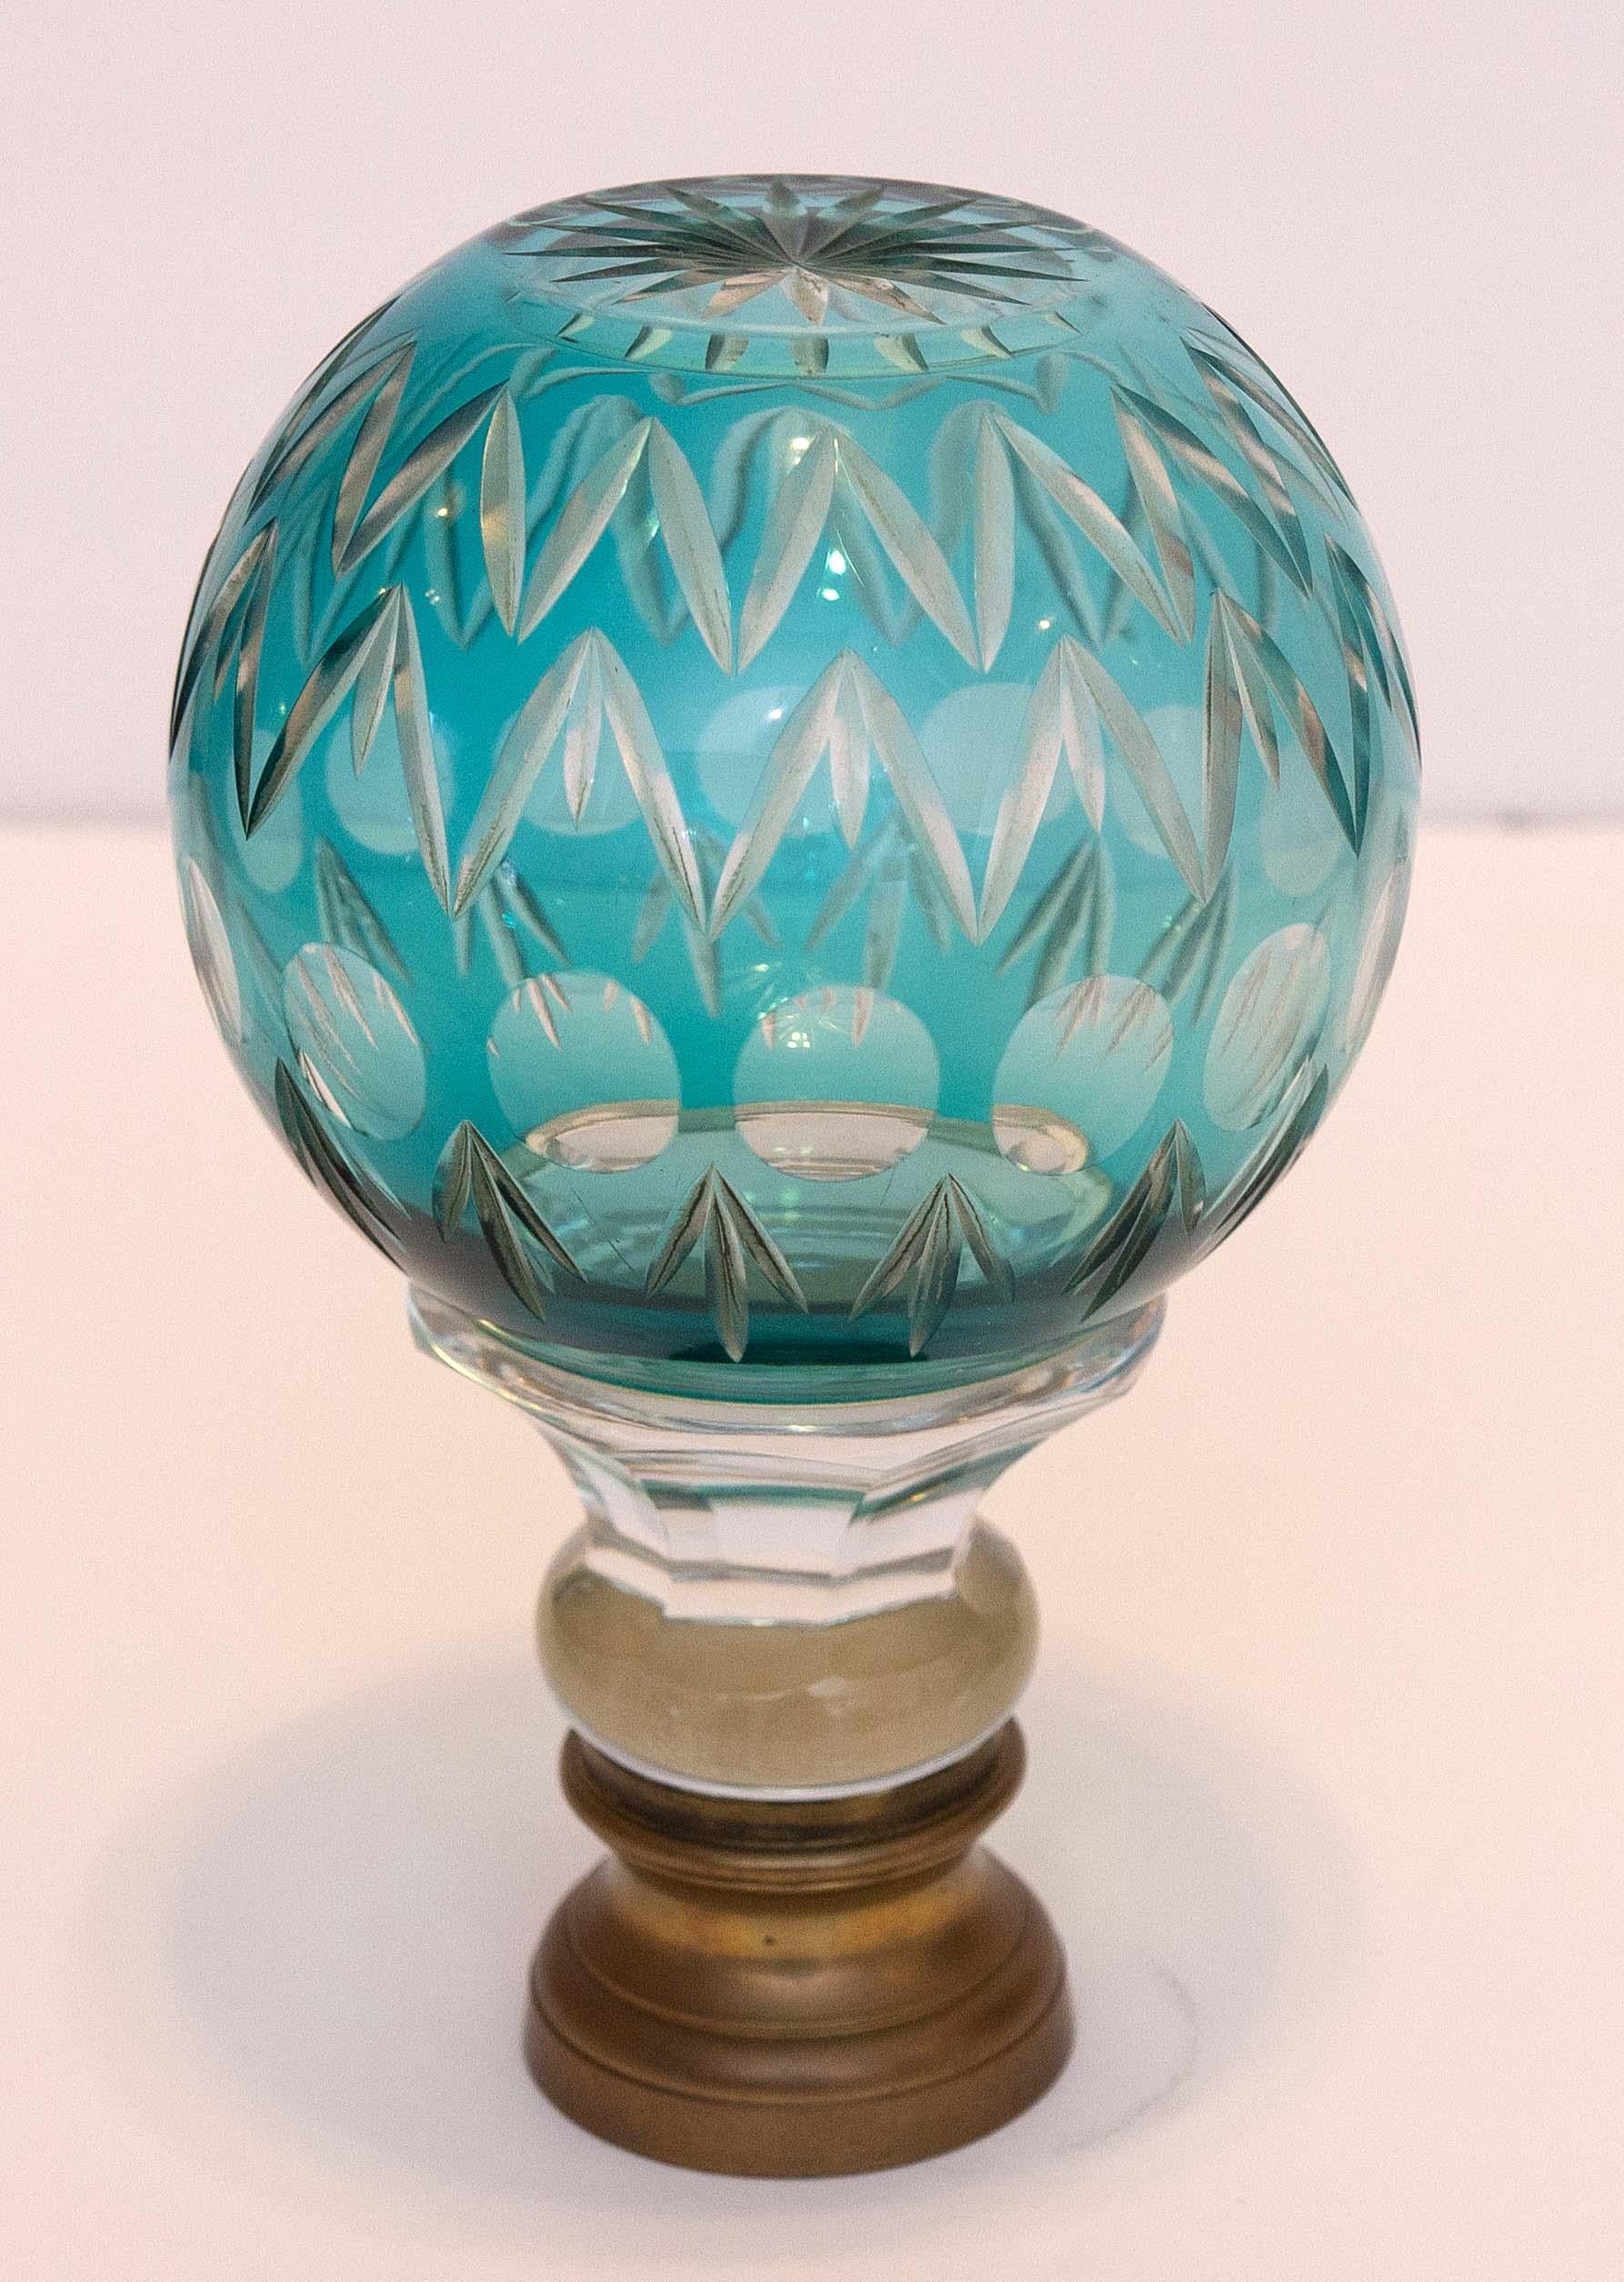 European French Turquoise Cut Glass Newel Post Finial Early 20th Century